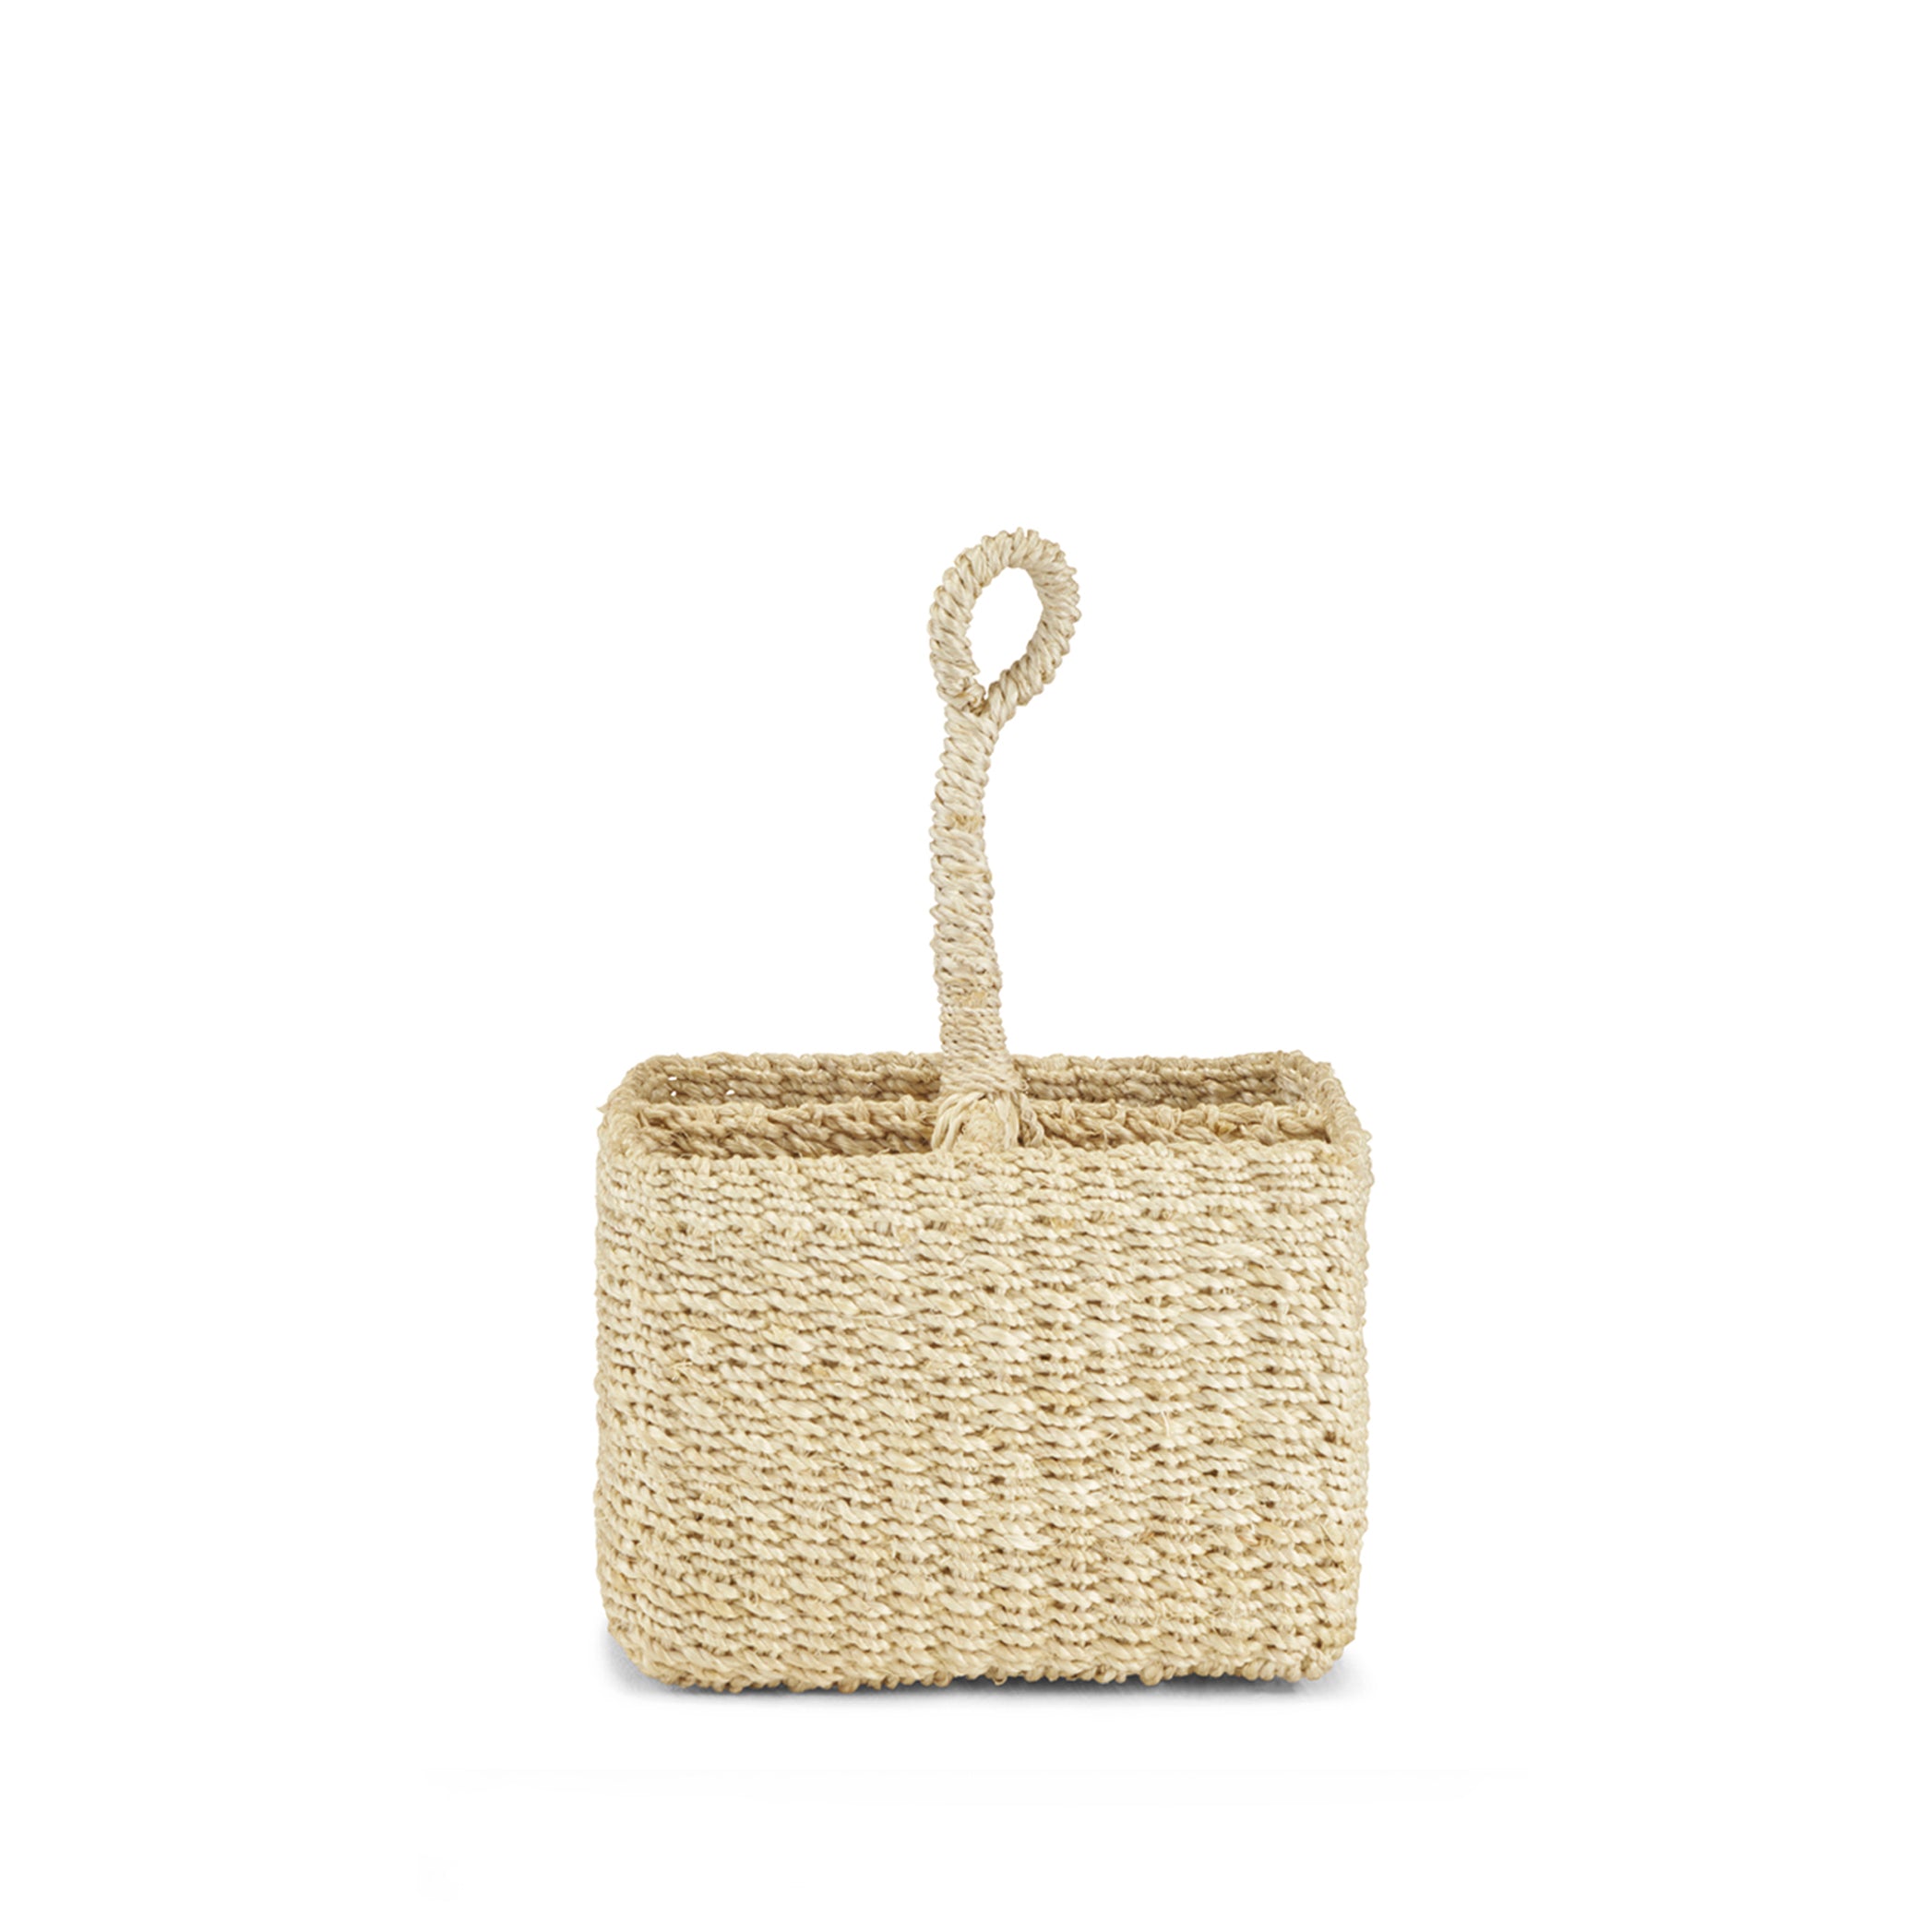 Abaca Small Woven Cutlery Basket With a Handle in Cream